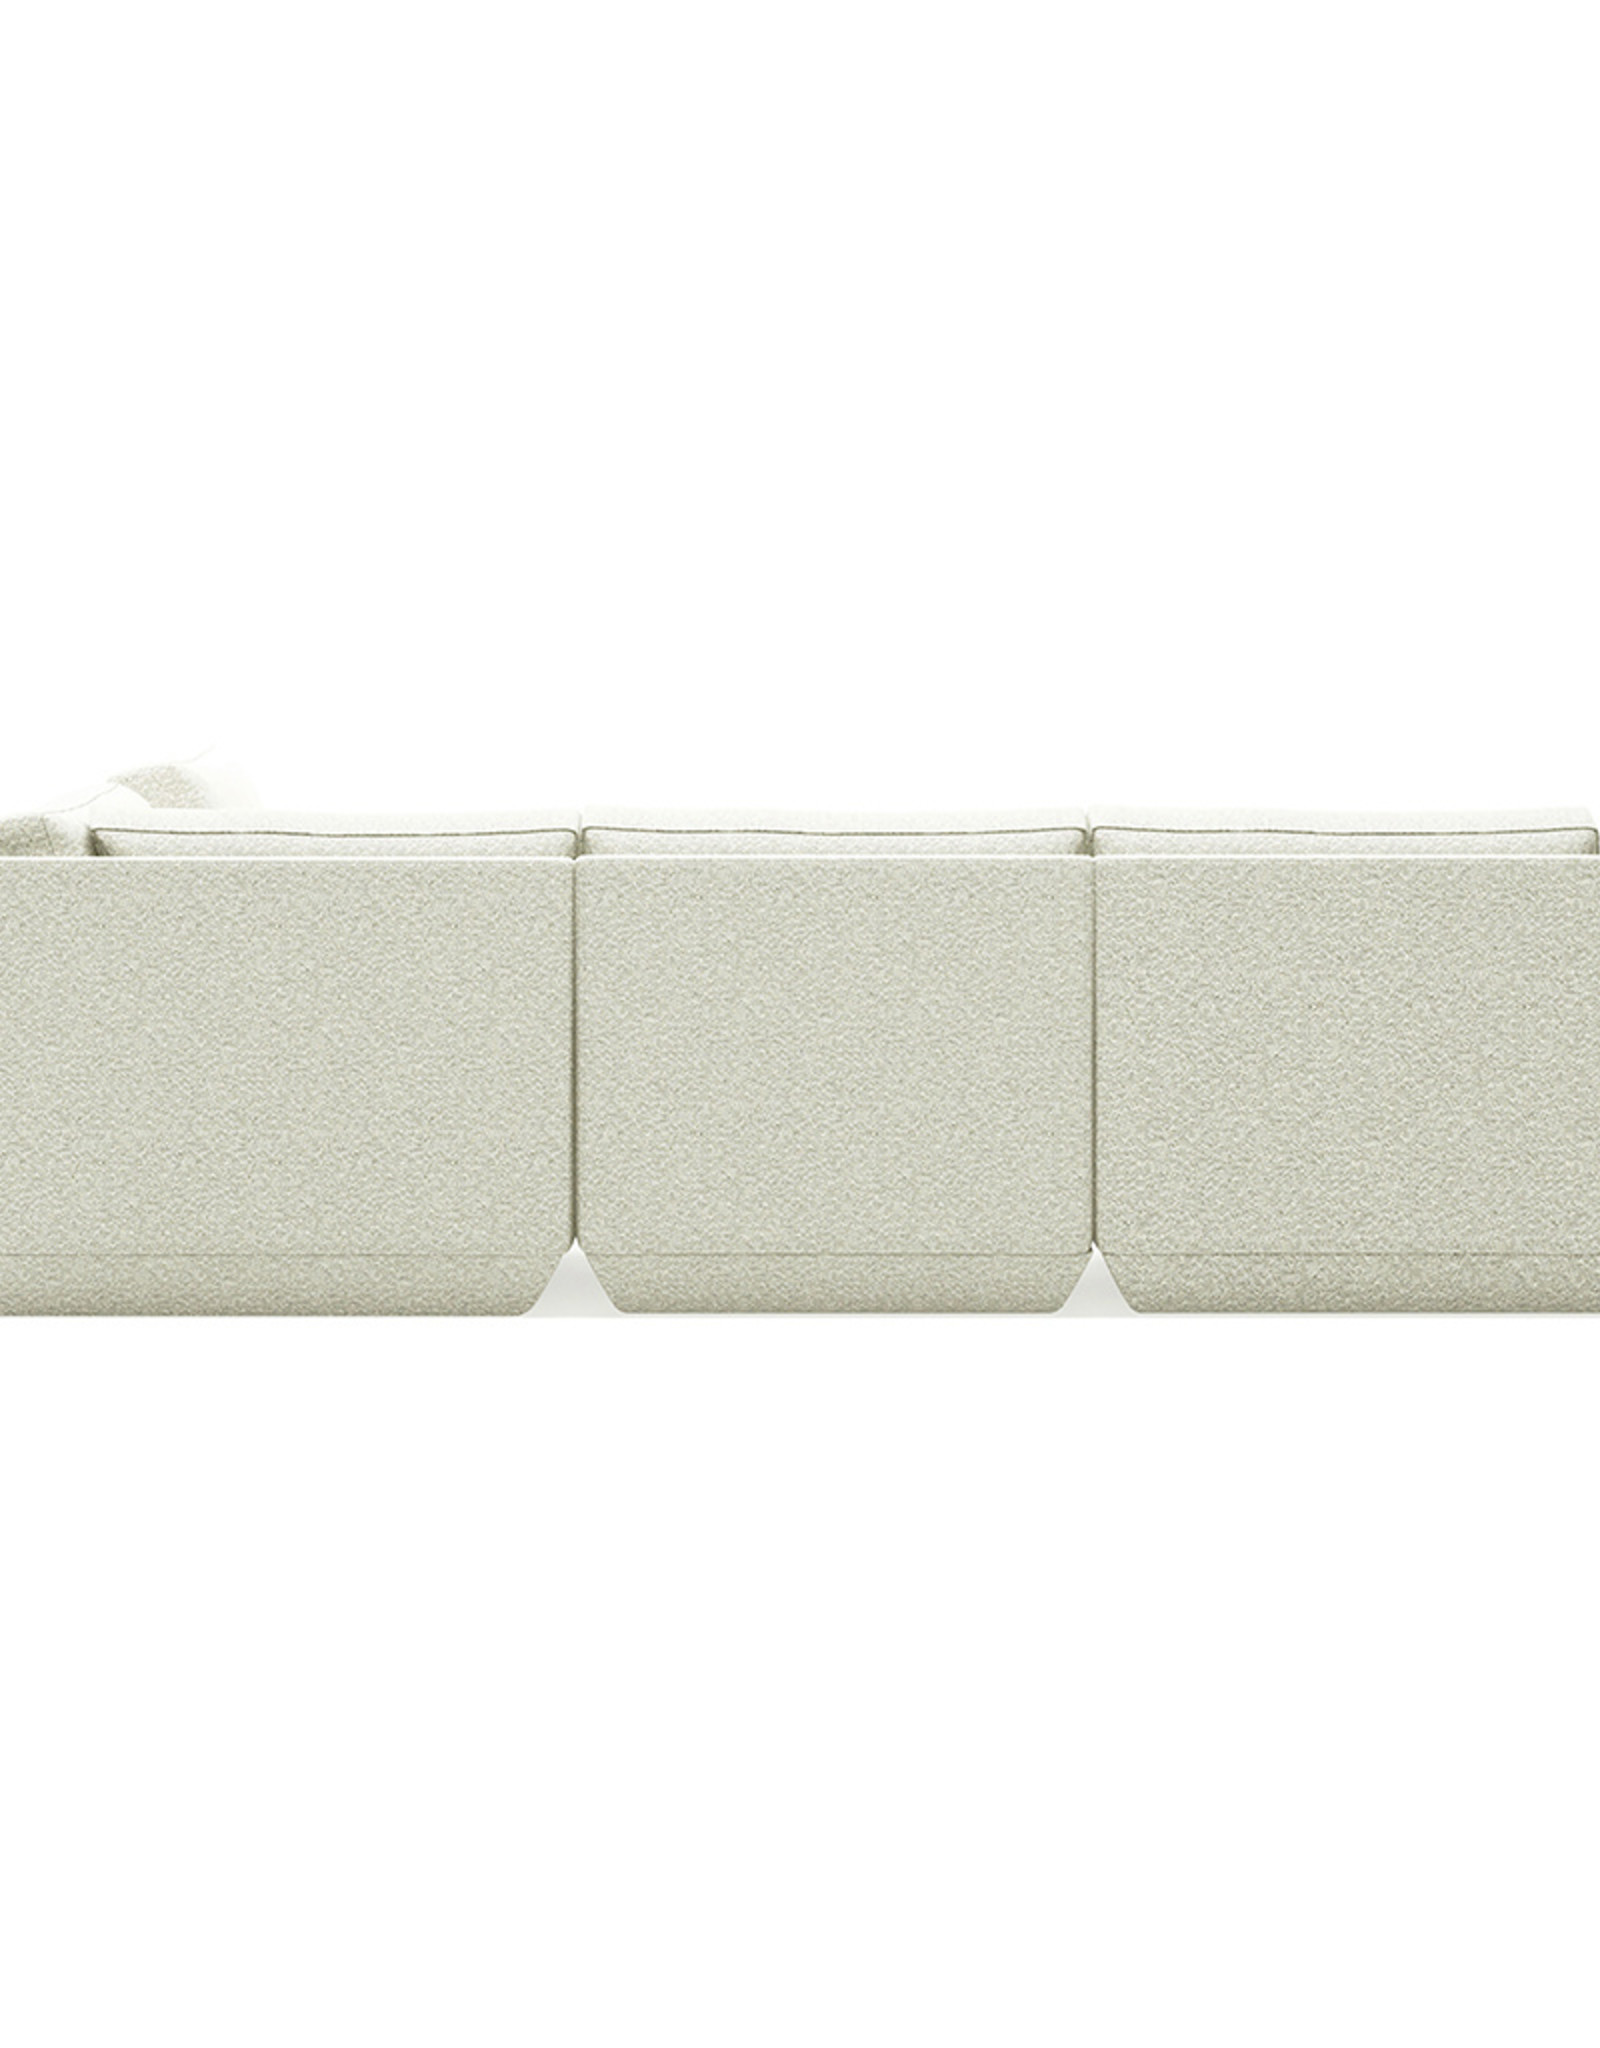 Gus* Modern Podium 5-PC Seating Group A, Right-facing